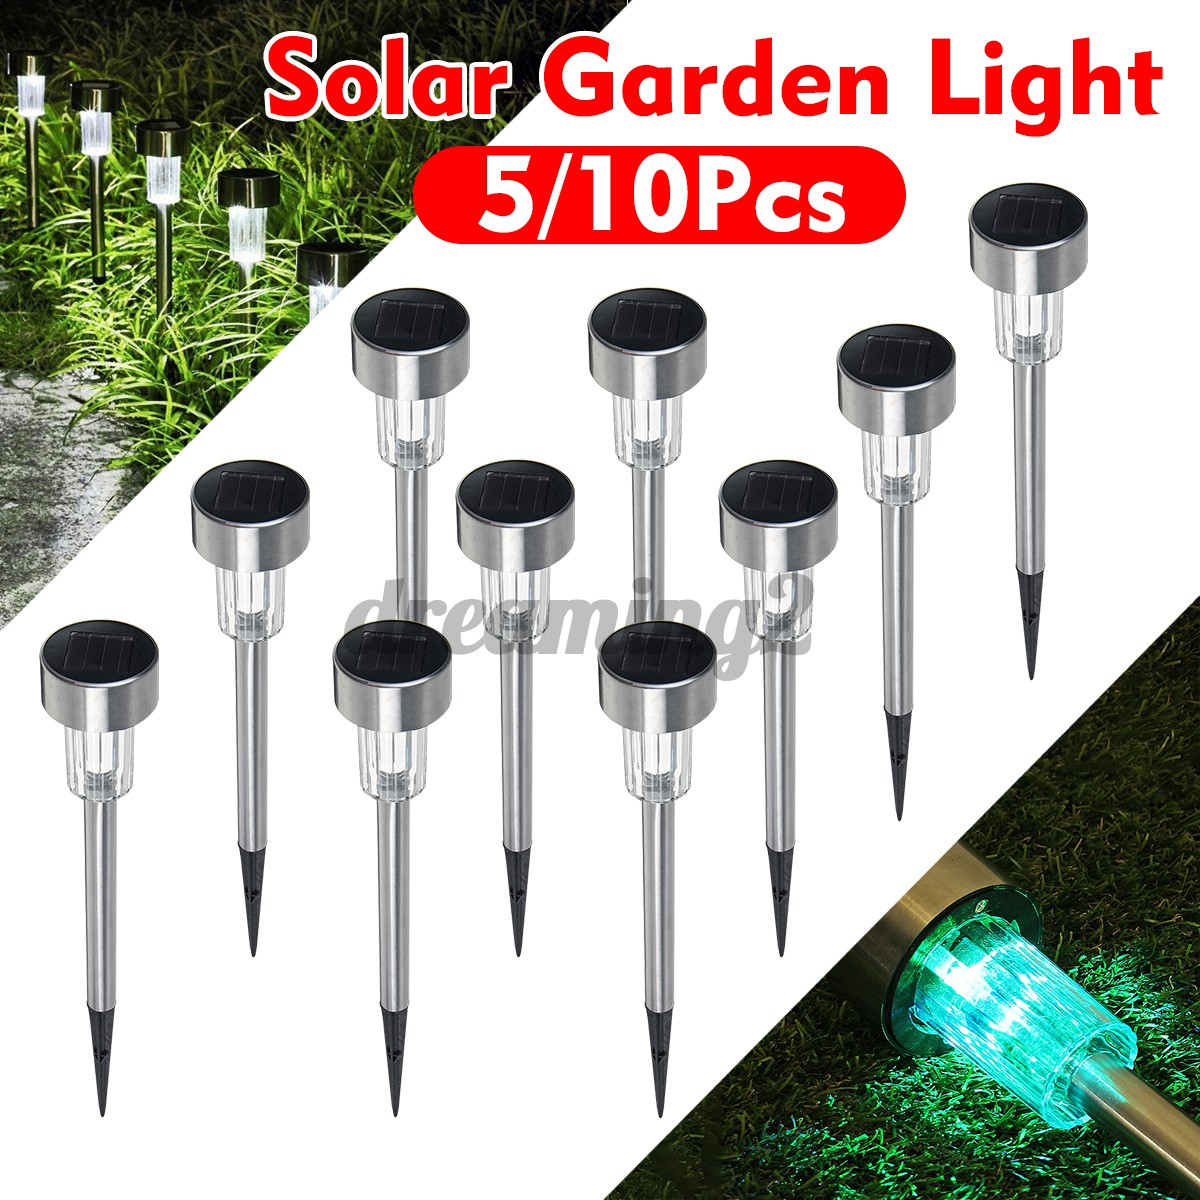 2020 Upgrade Automatic Light Control Switch IP65 Waterproof Solar Path Colorful Lights Outdoor Garden Landscape Decoration Light for Yard Patio Lawn Pathways Night Lights